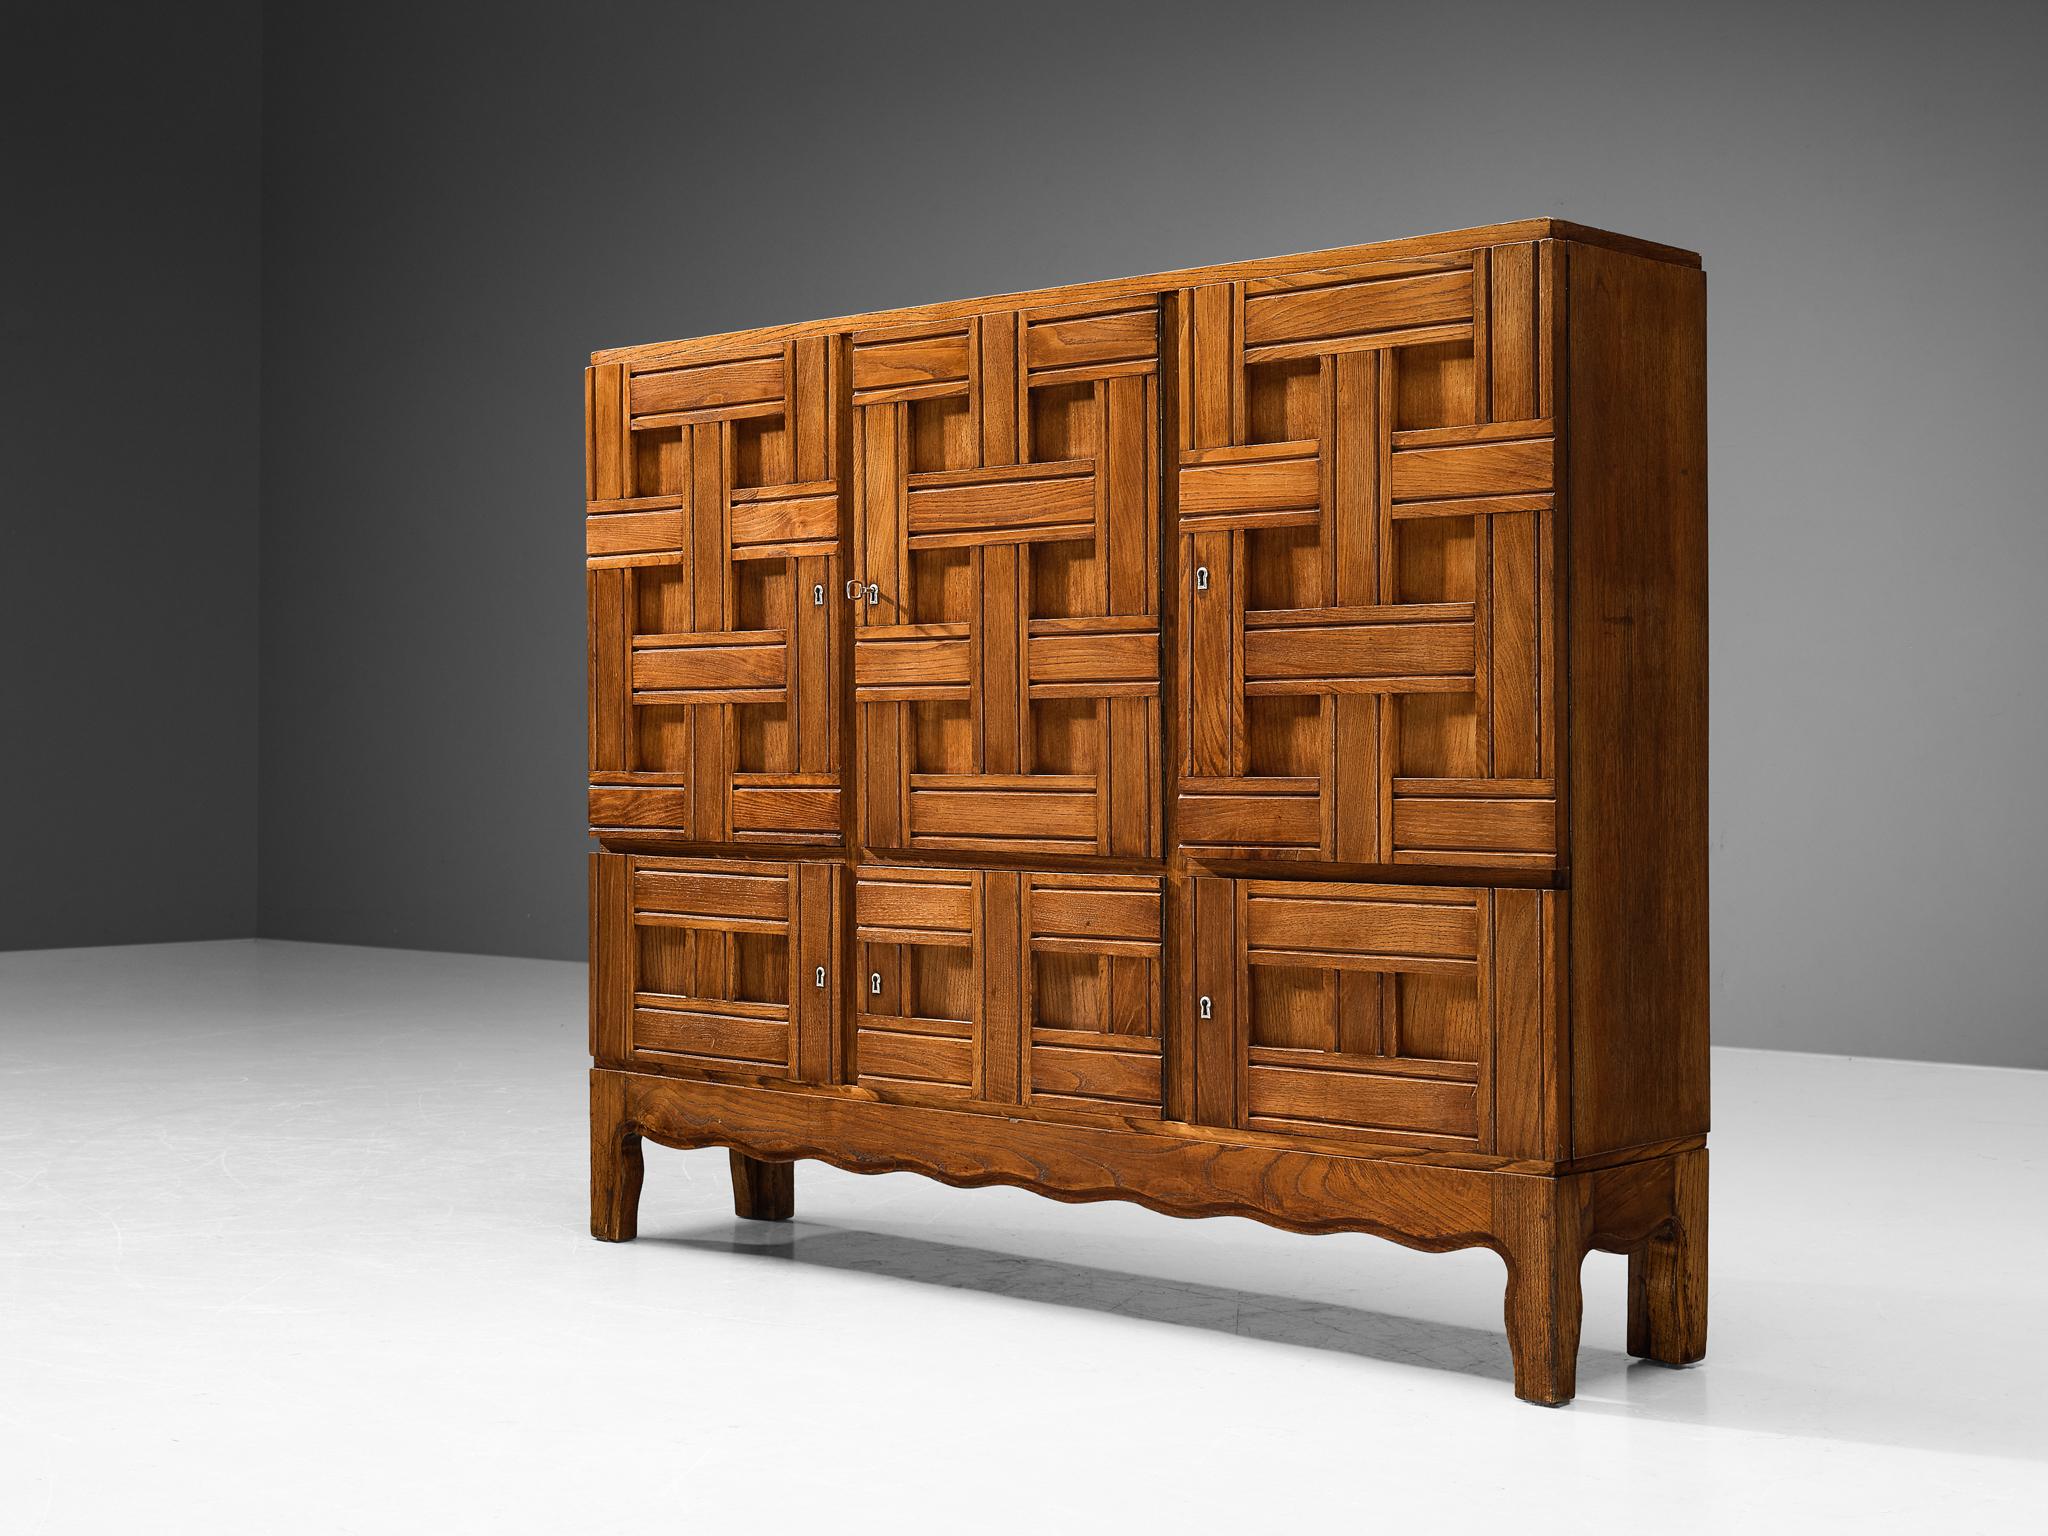 Paolo Buffa, cabinet, chestnut, Italy, 1940s.

This rare cabinet has a subtle decorative character and is created by the talented Italian designer and architect Paolo Buffa (1903-1970). The front of this wonderful piece features an artistic